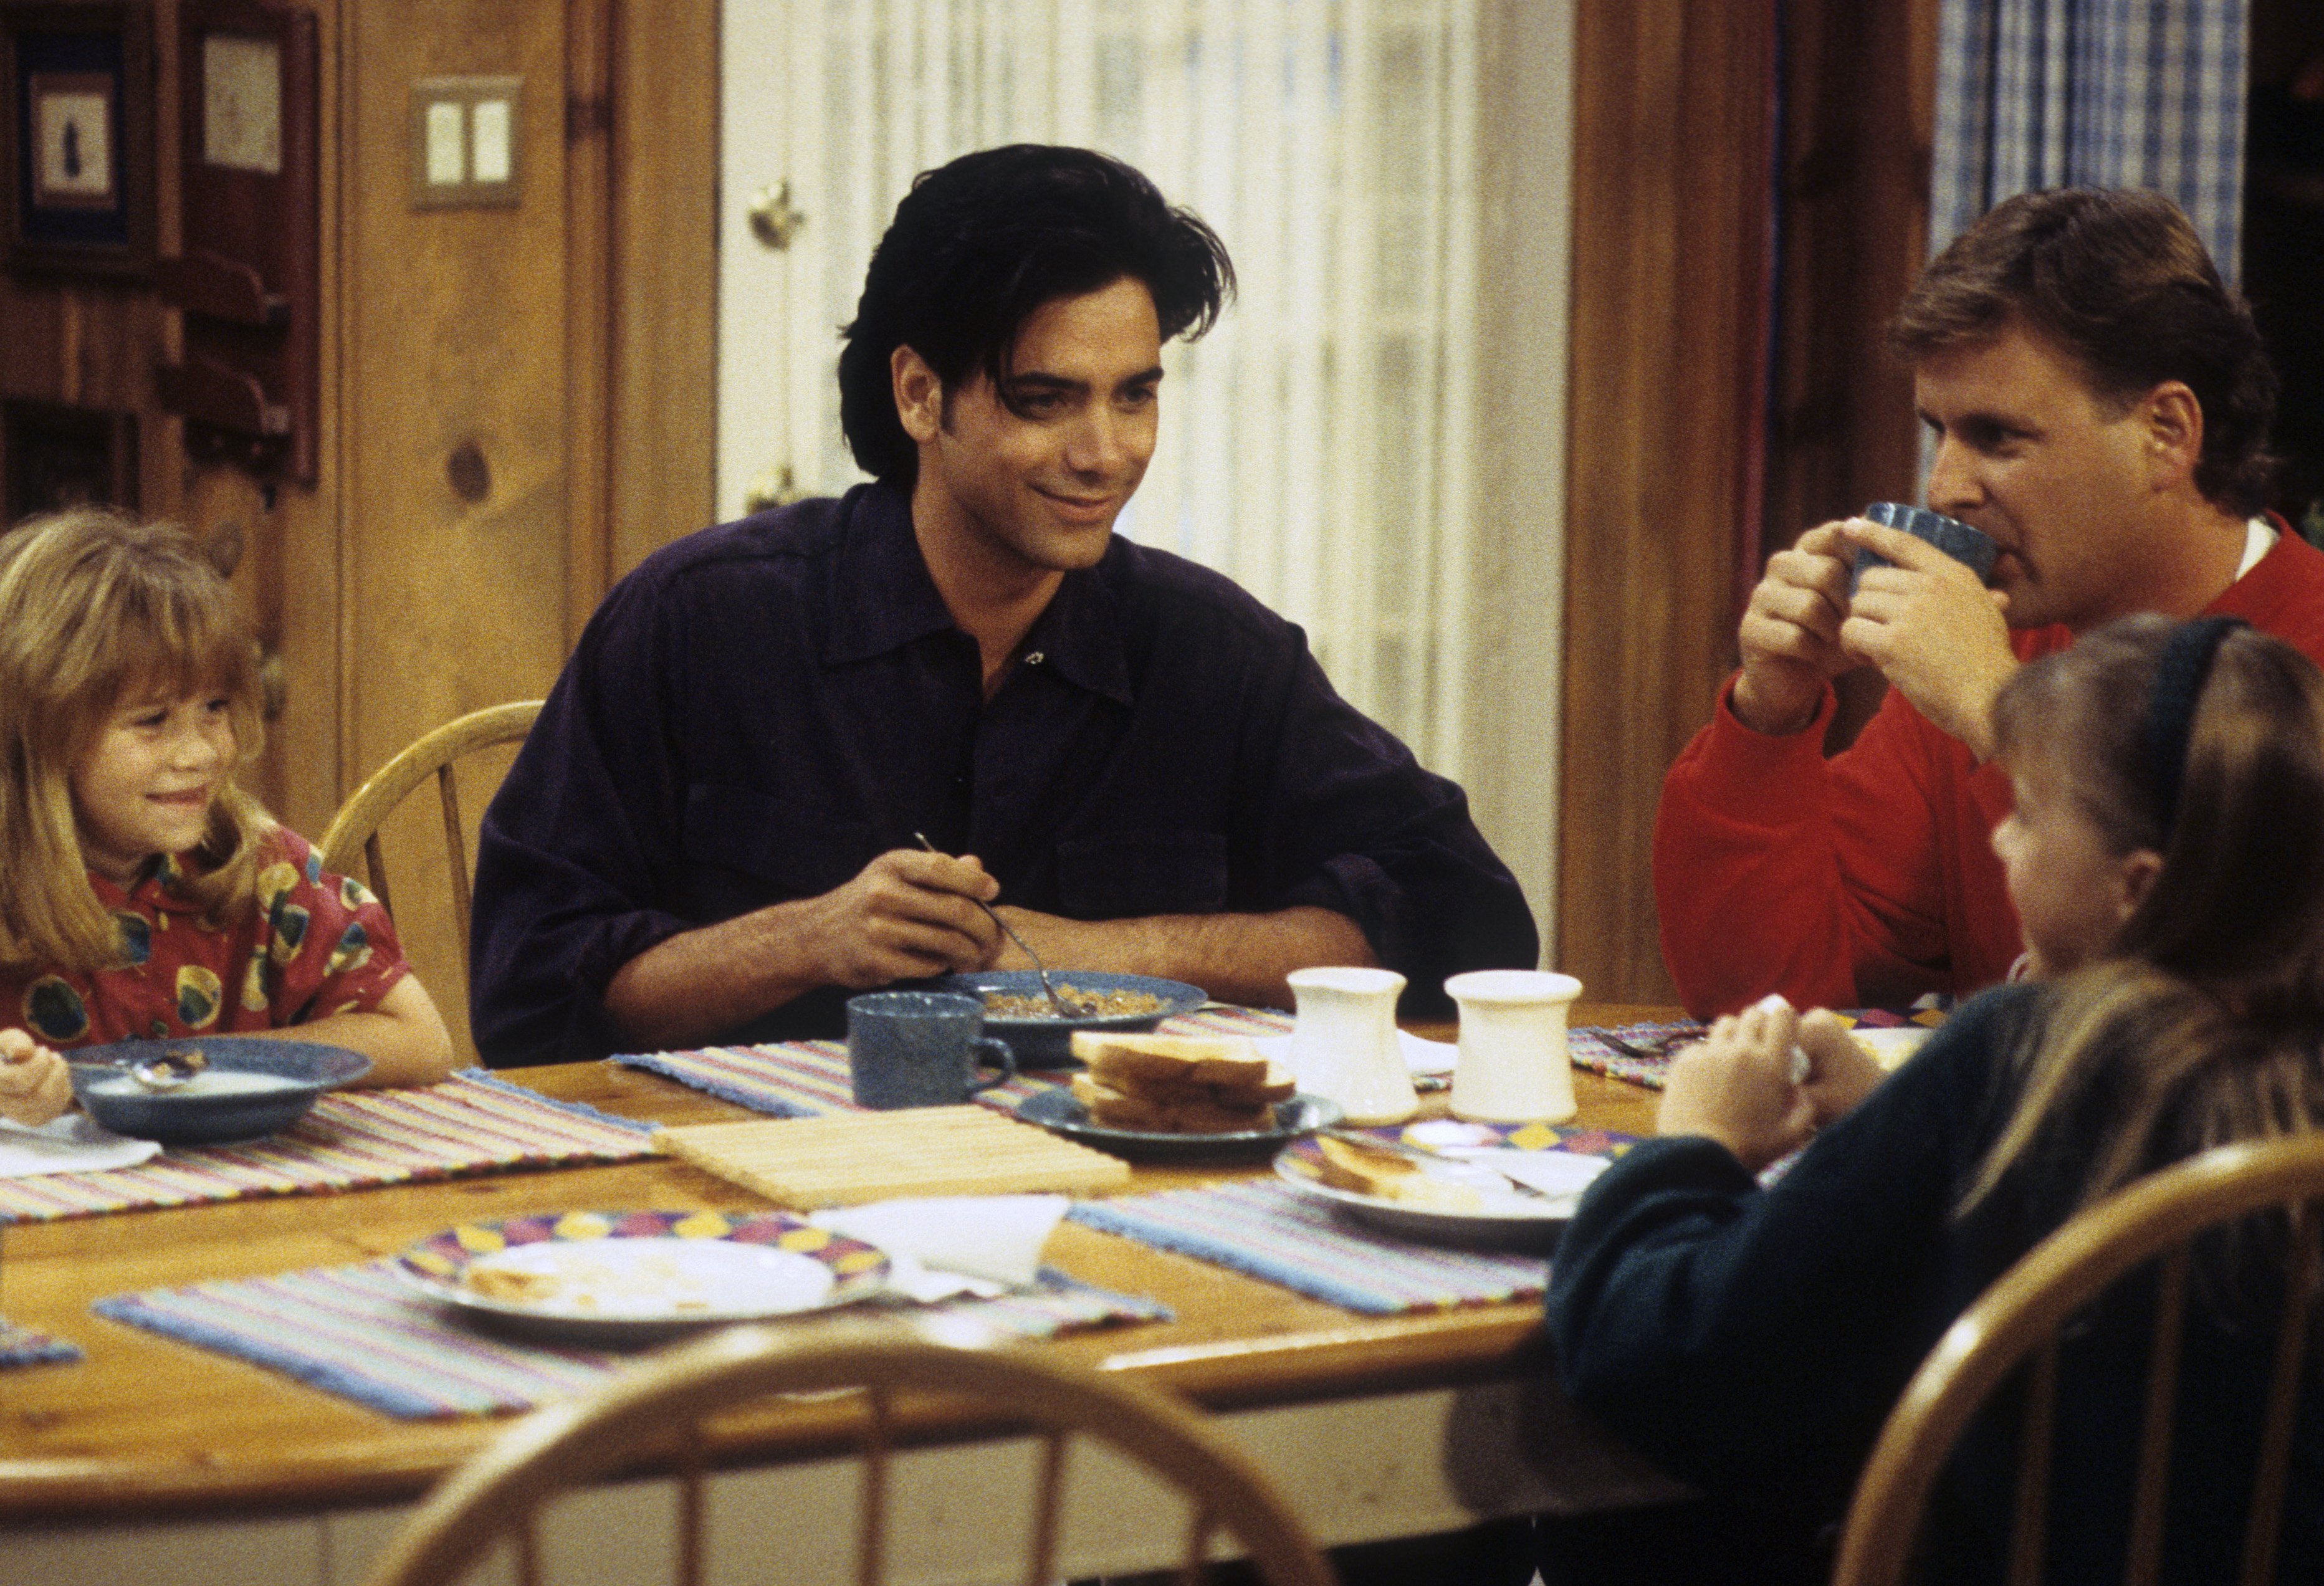 John Stamos in 'Full House' episode titled 'The Prying Game'